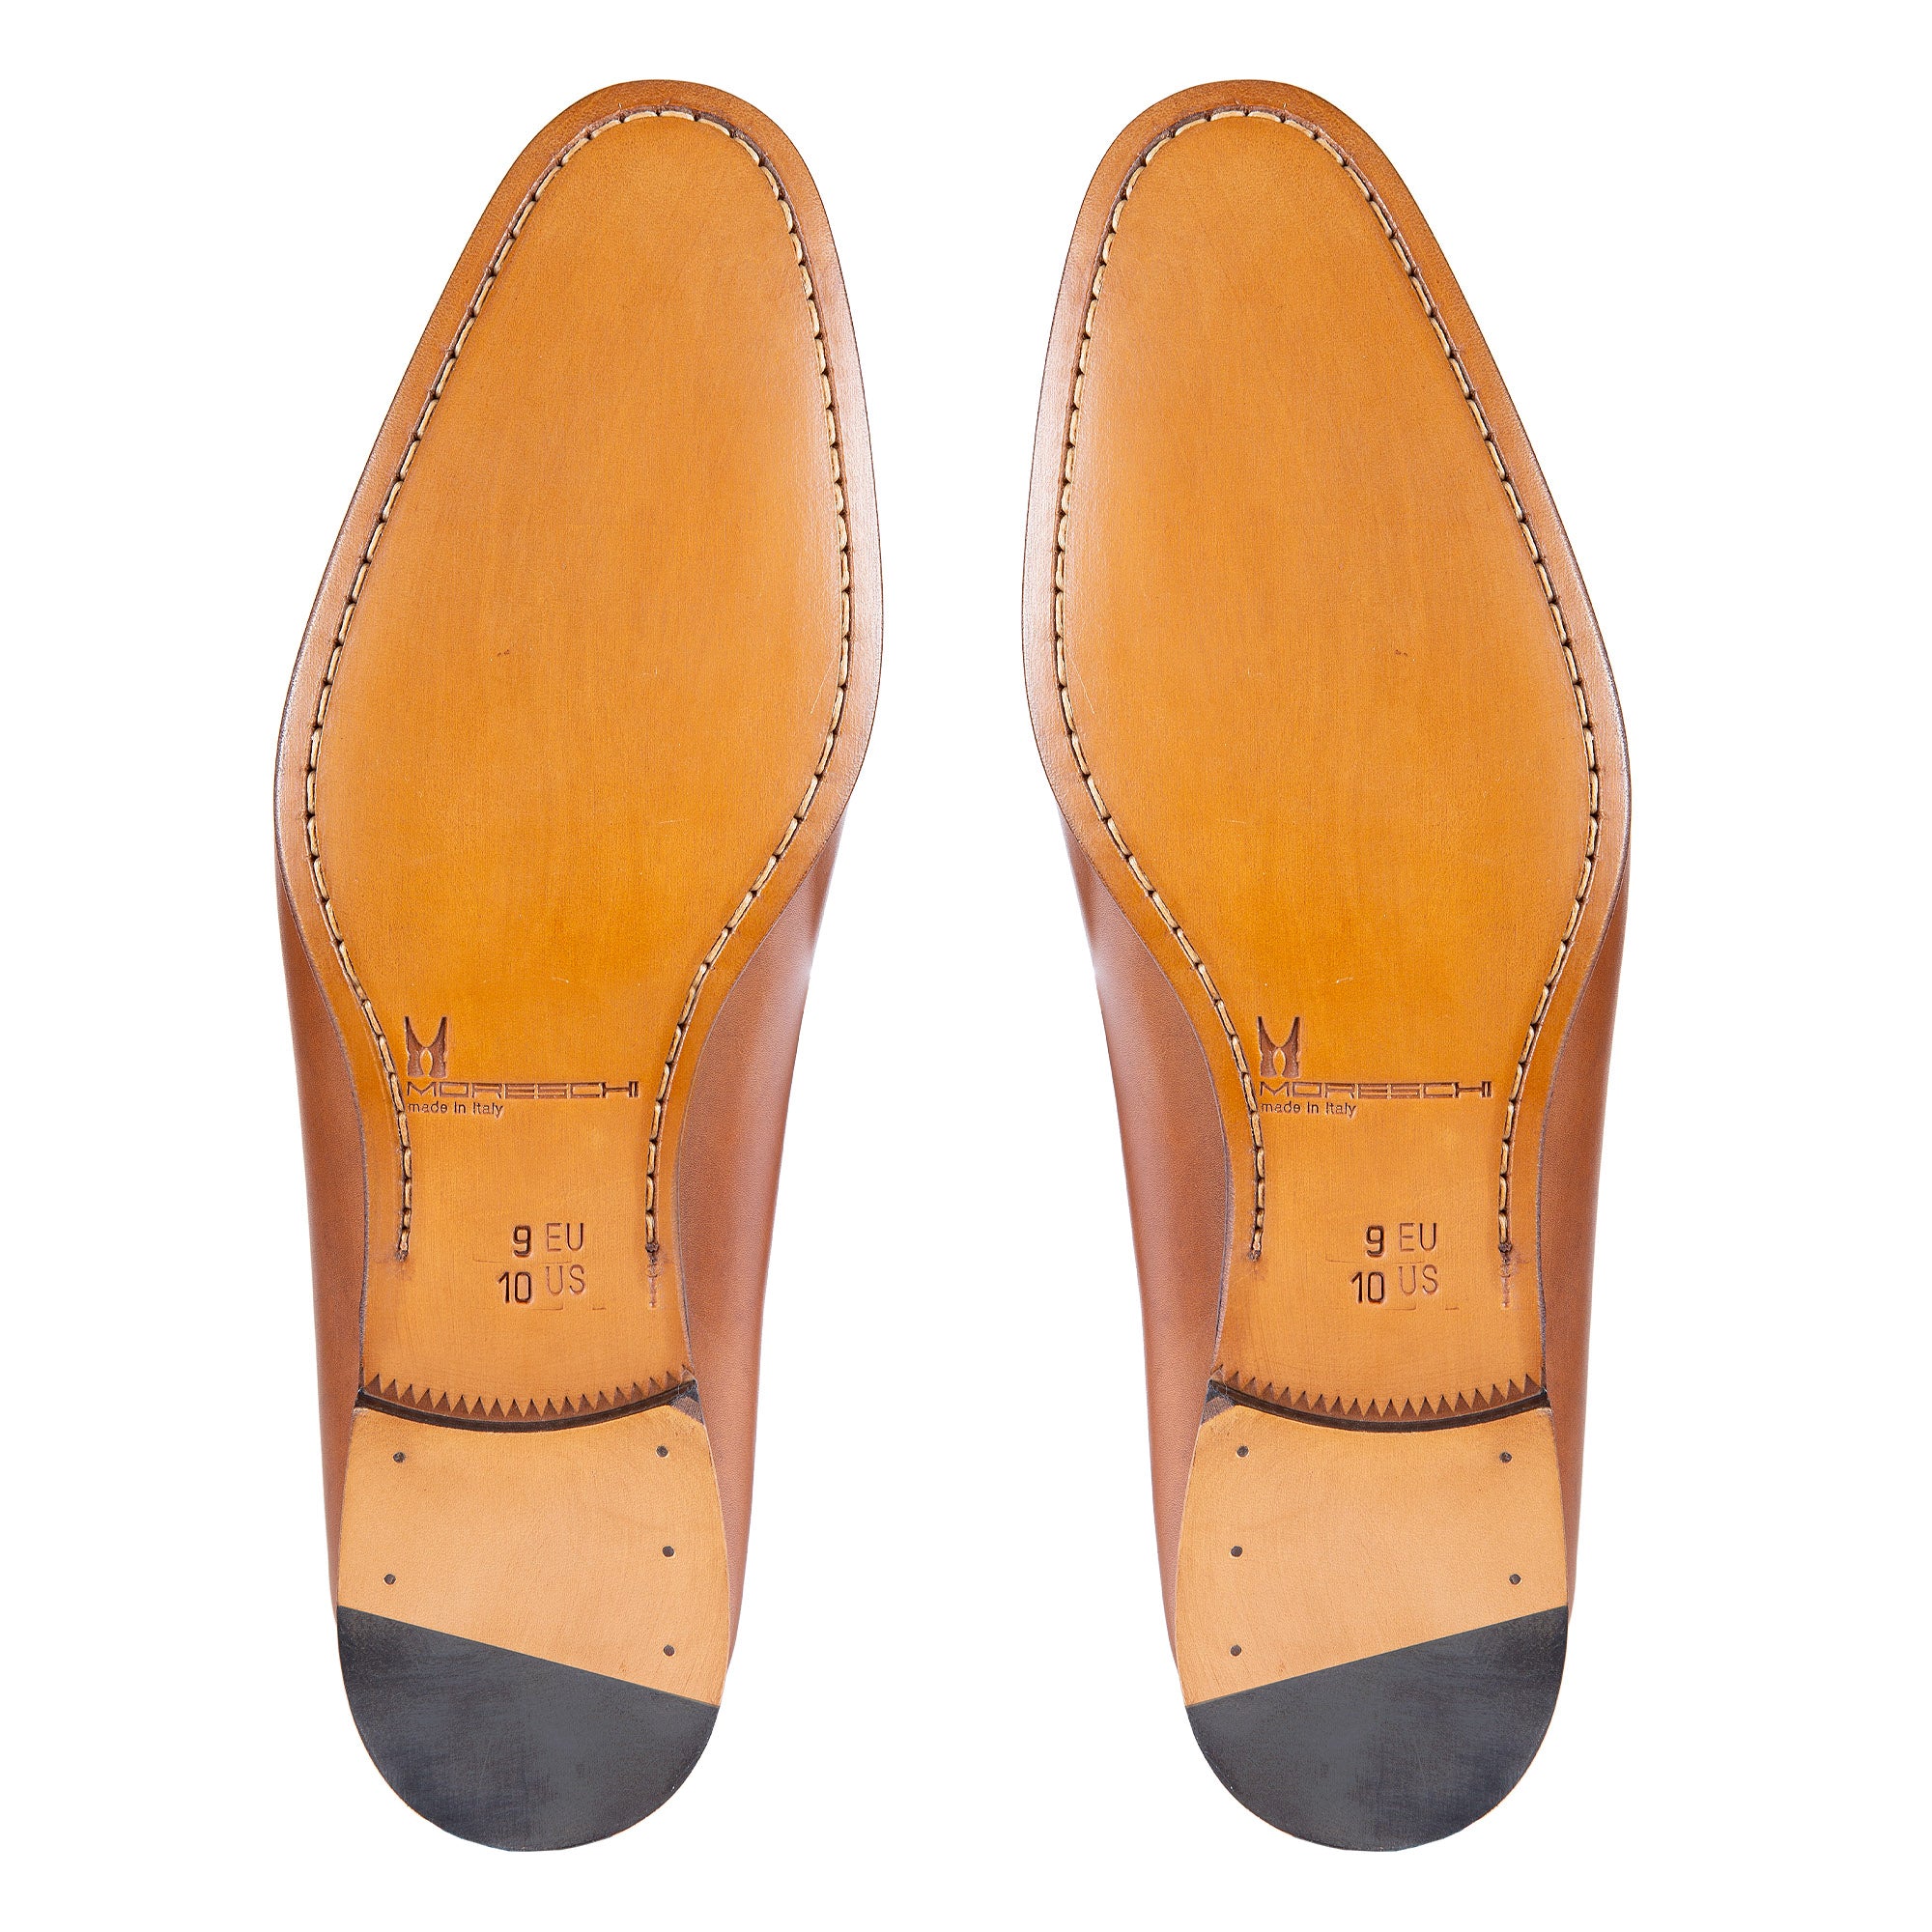 MORESCHI BUTTERFLY LOAFER SHOES BRANDY